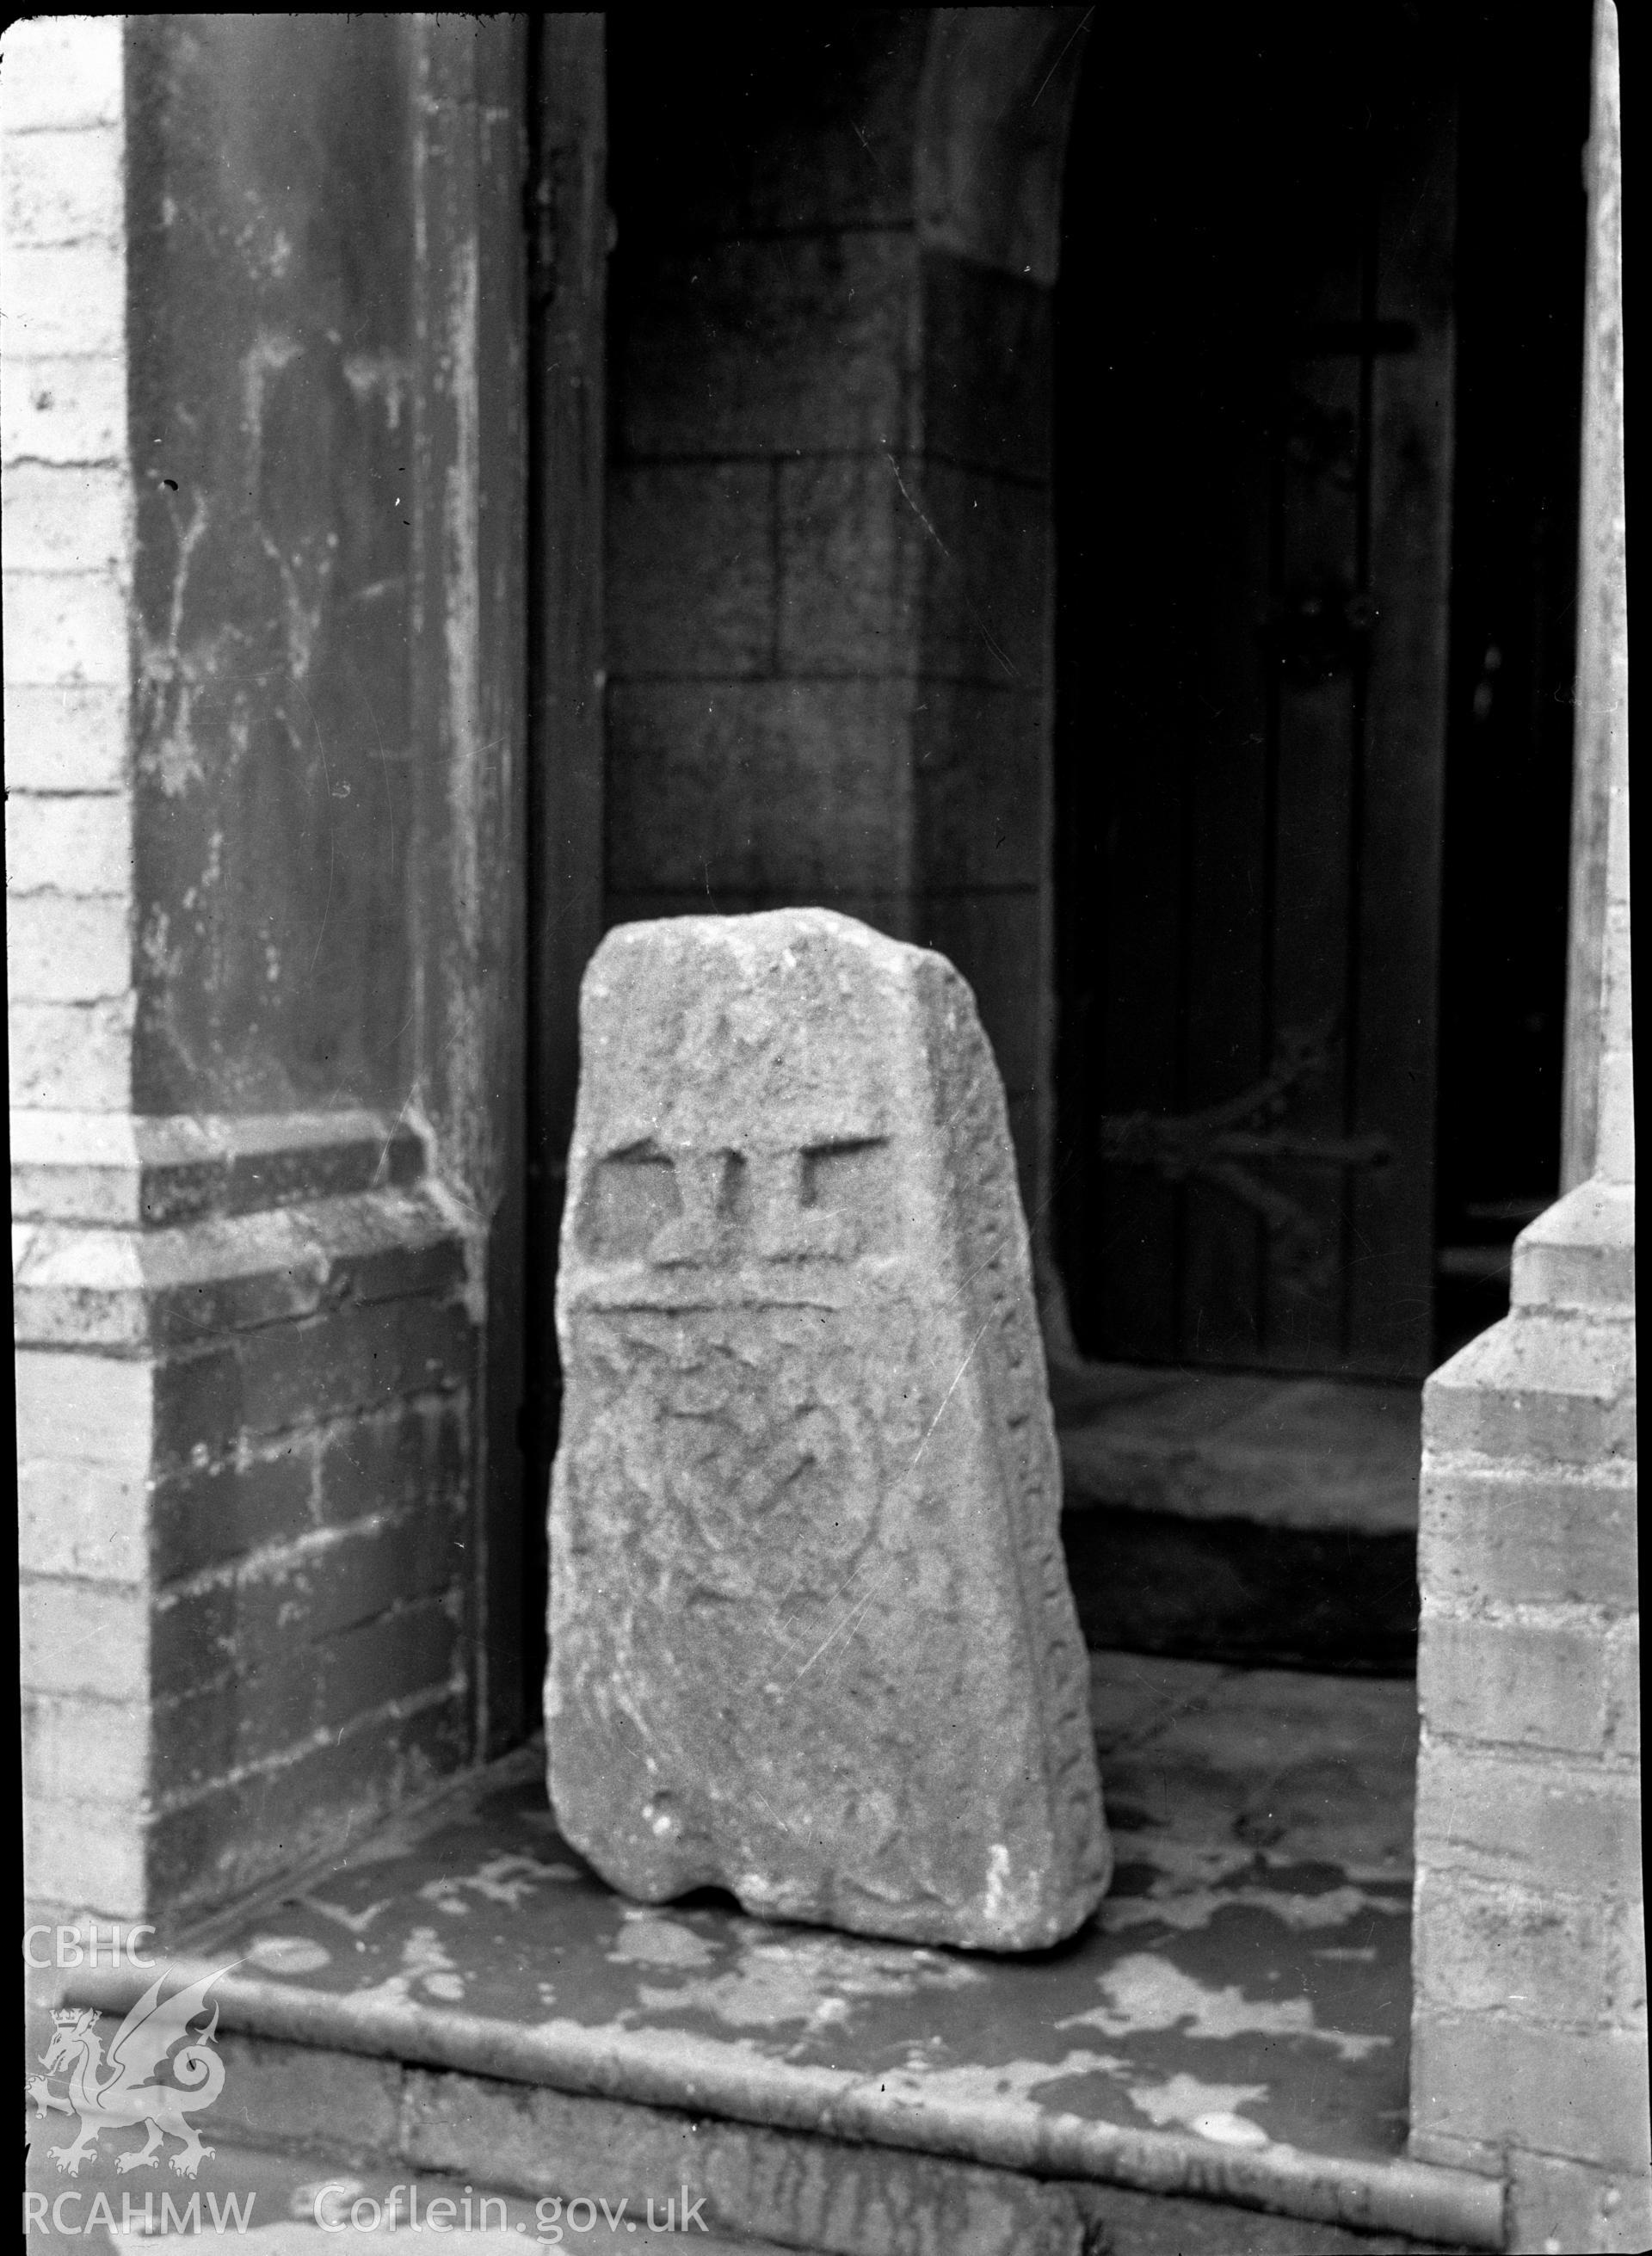 Digital copy of a nitrate negative showing an inscribed stone in the chapel on Bardsey Island. From the Cadw Monuments in Care Collection.